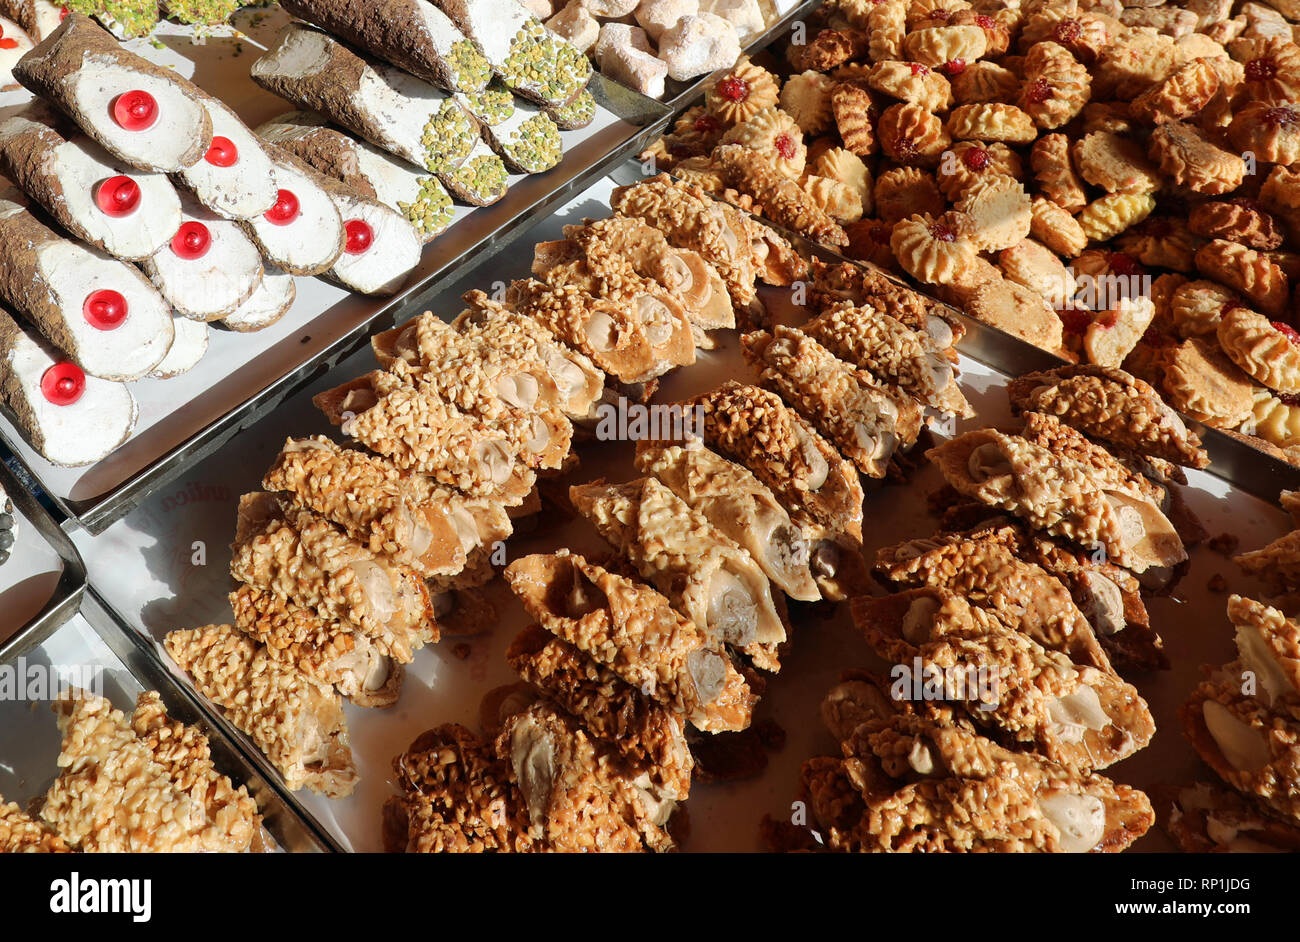 many pastries with pistachio and cherries for sale in the Italian pastry stand called Cannolo Siciliano Stock Photo